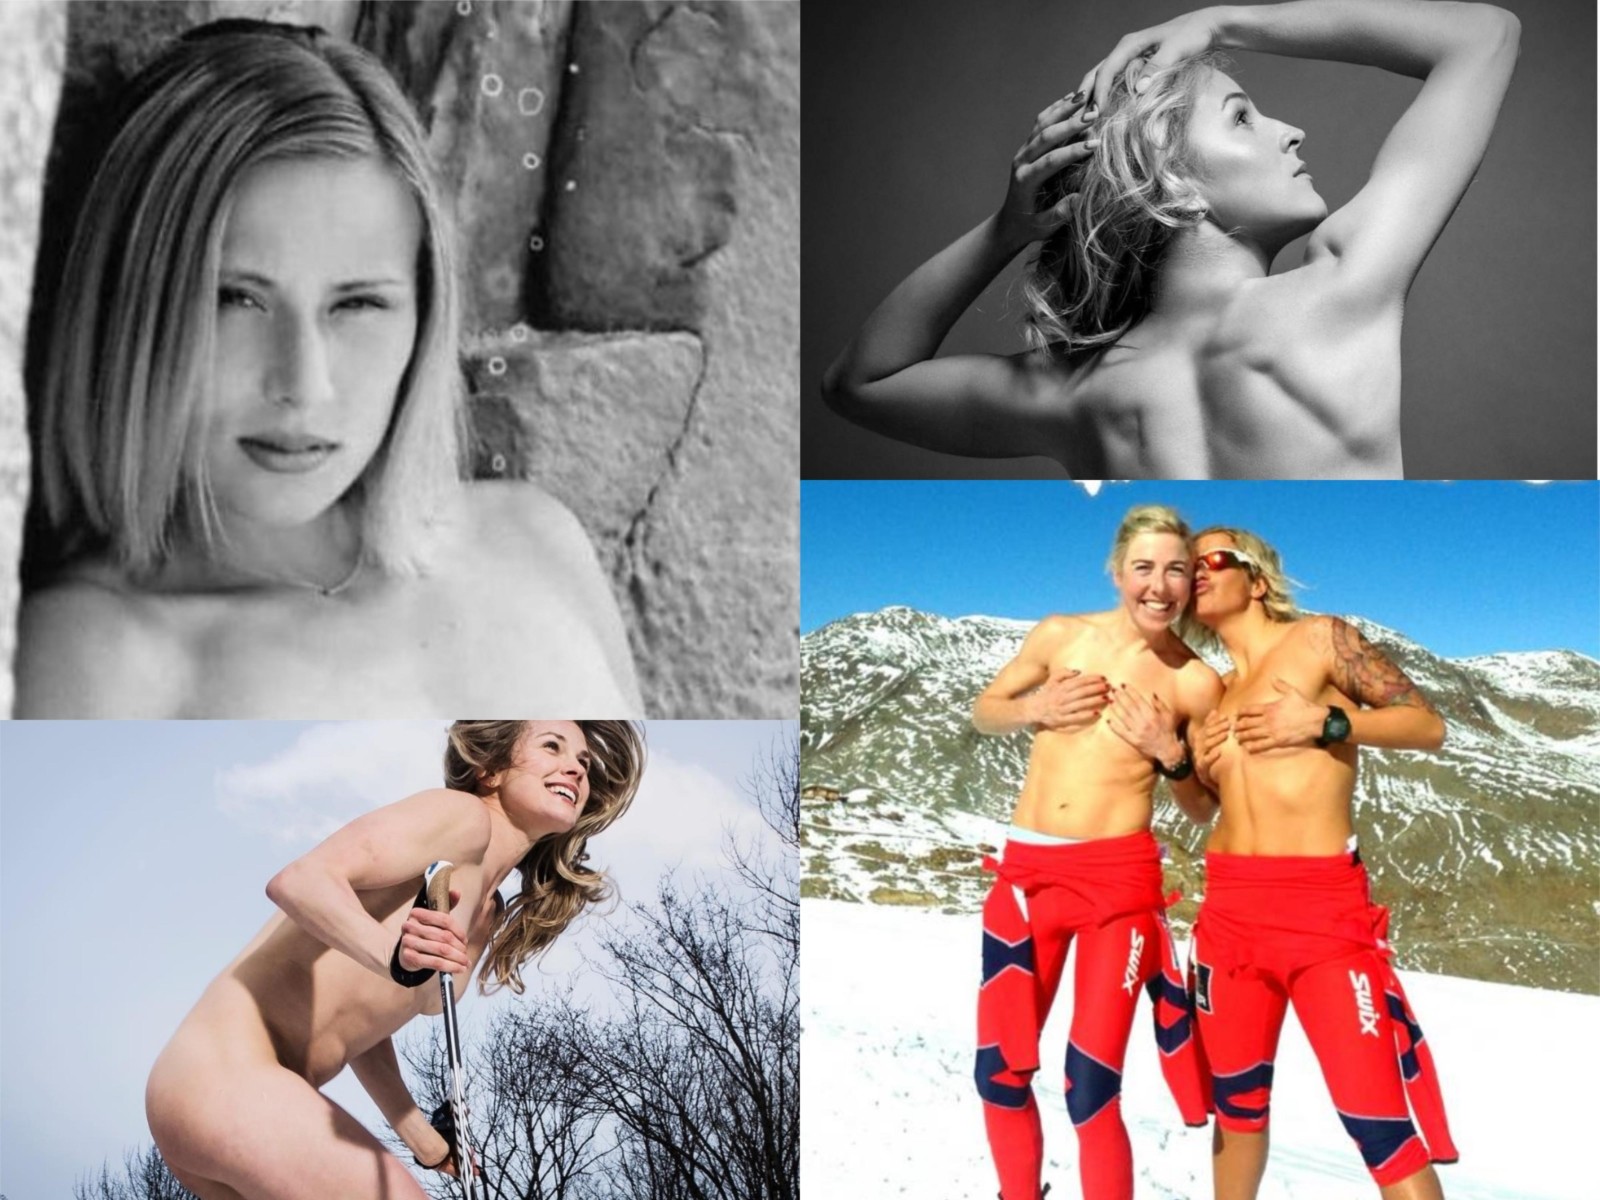 Nude Photoshoots Boost Popularity Of Skiing. Whether You Like It – Or Not